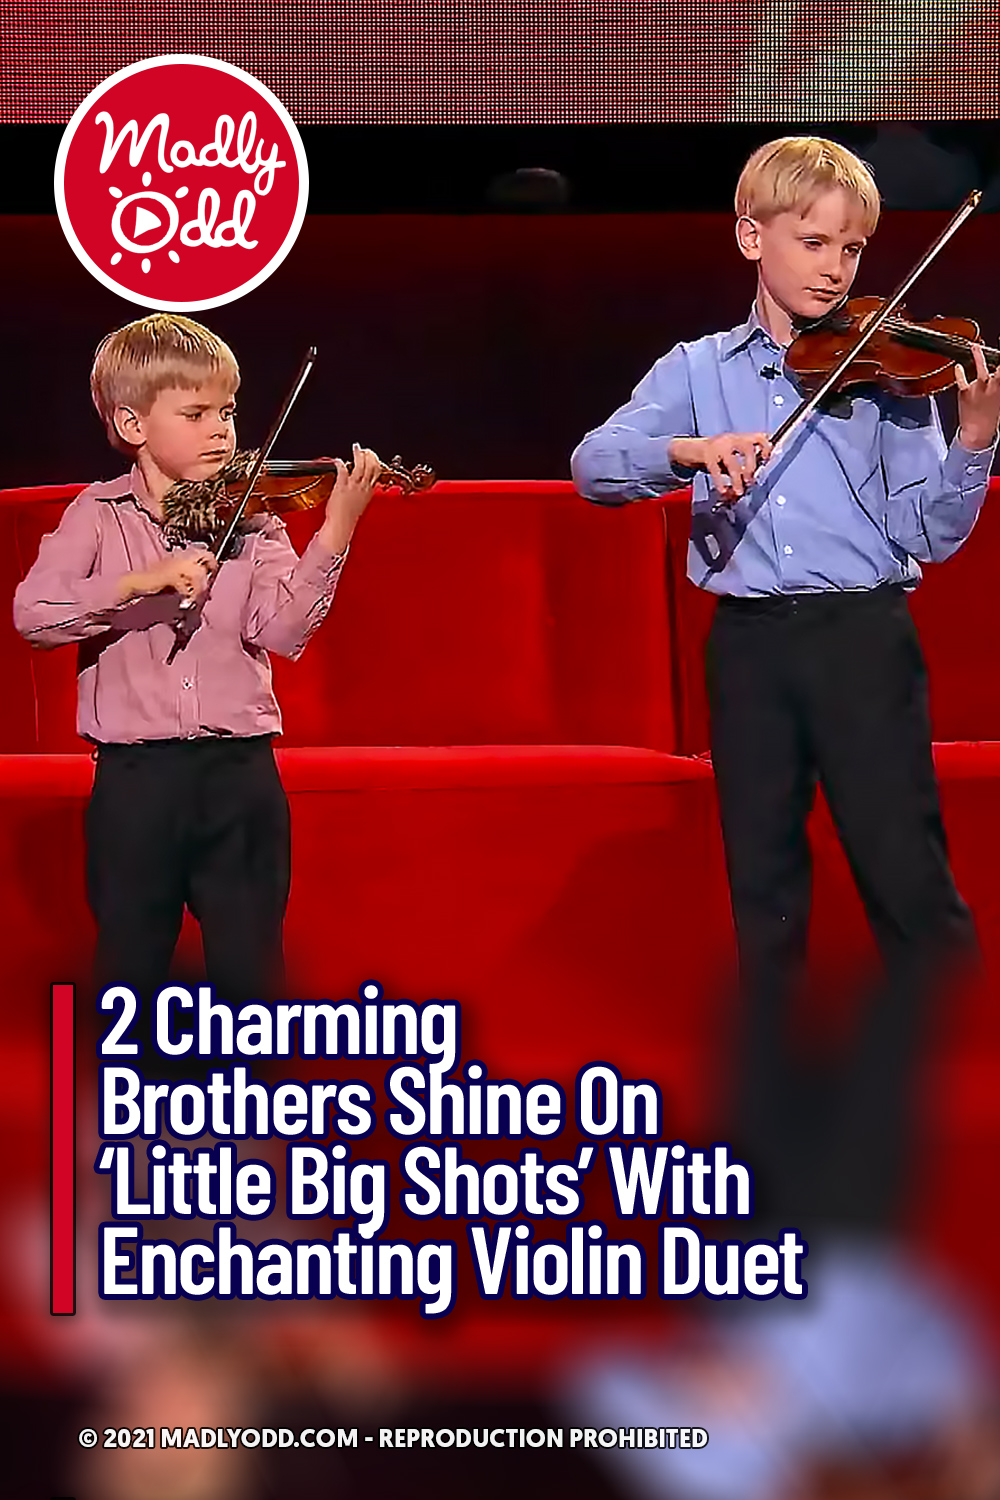 2 Charming Brothers Shine On ‘Little Big Shots’ With Enchanting Violin Duet